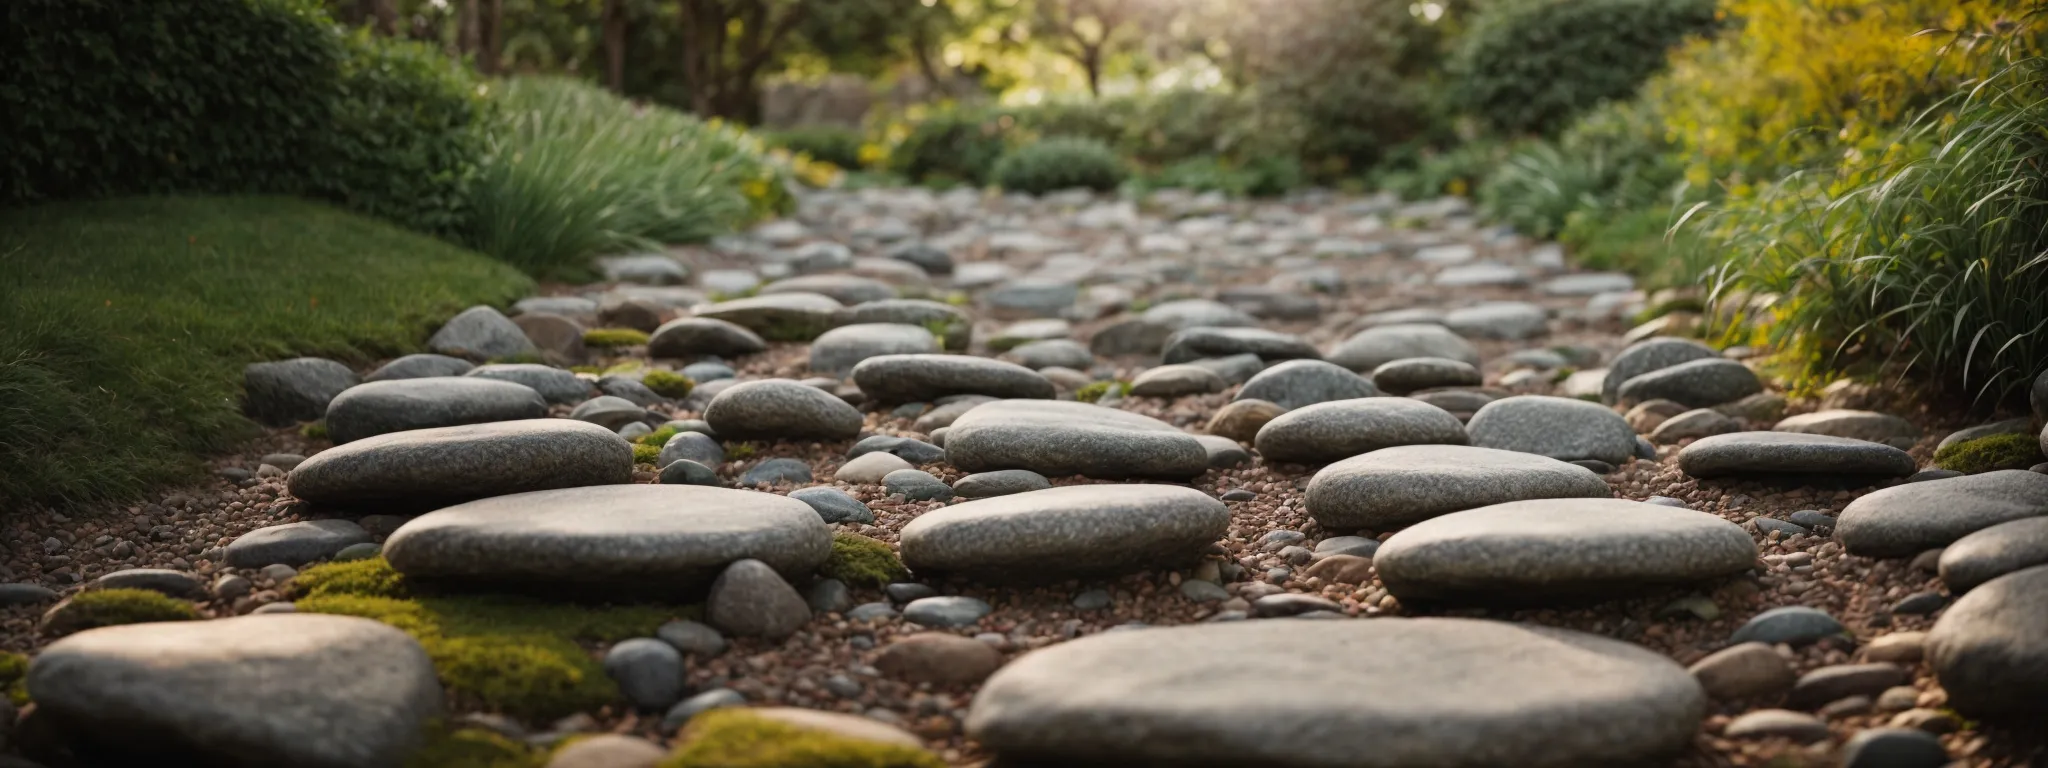 a trail of smooth stones leading through a manicured garden to symbolize clear navigation pathways.